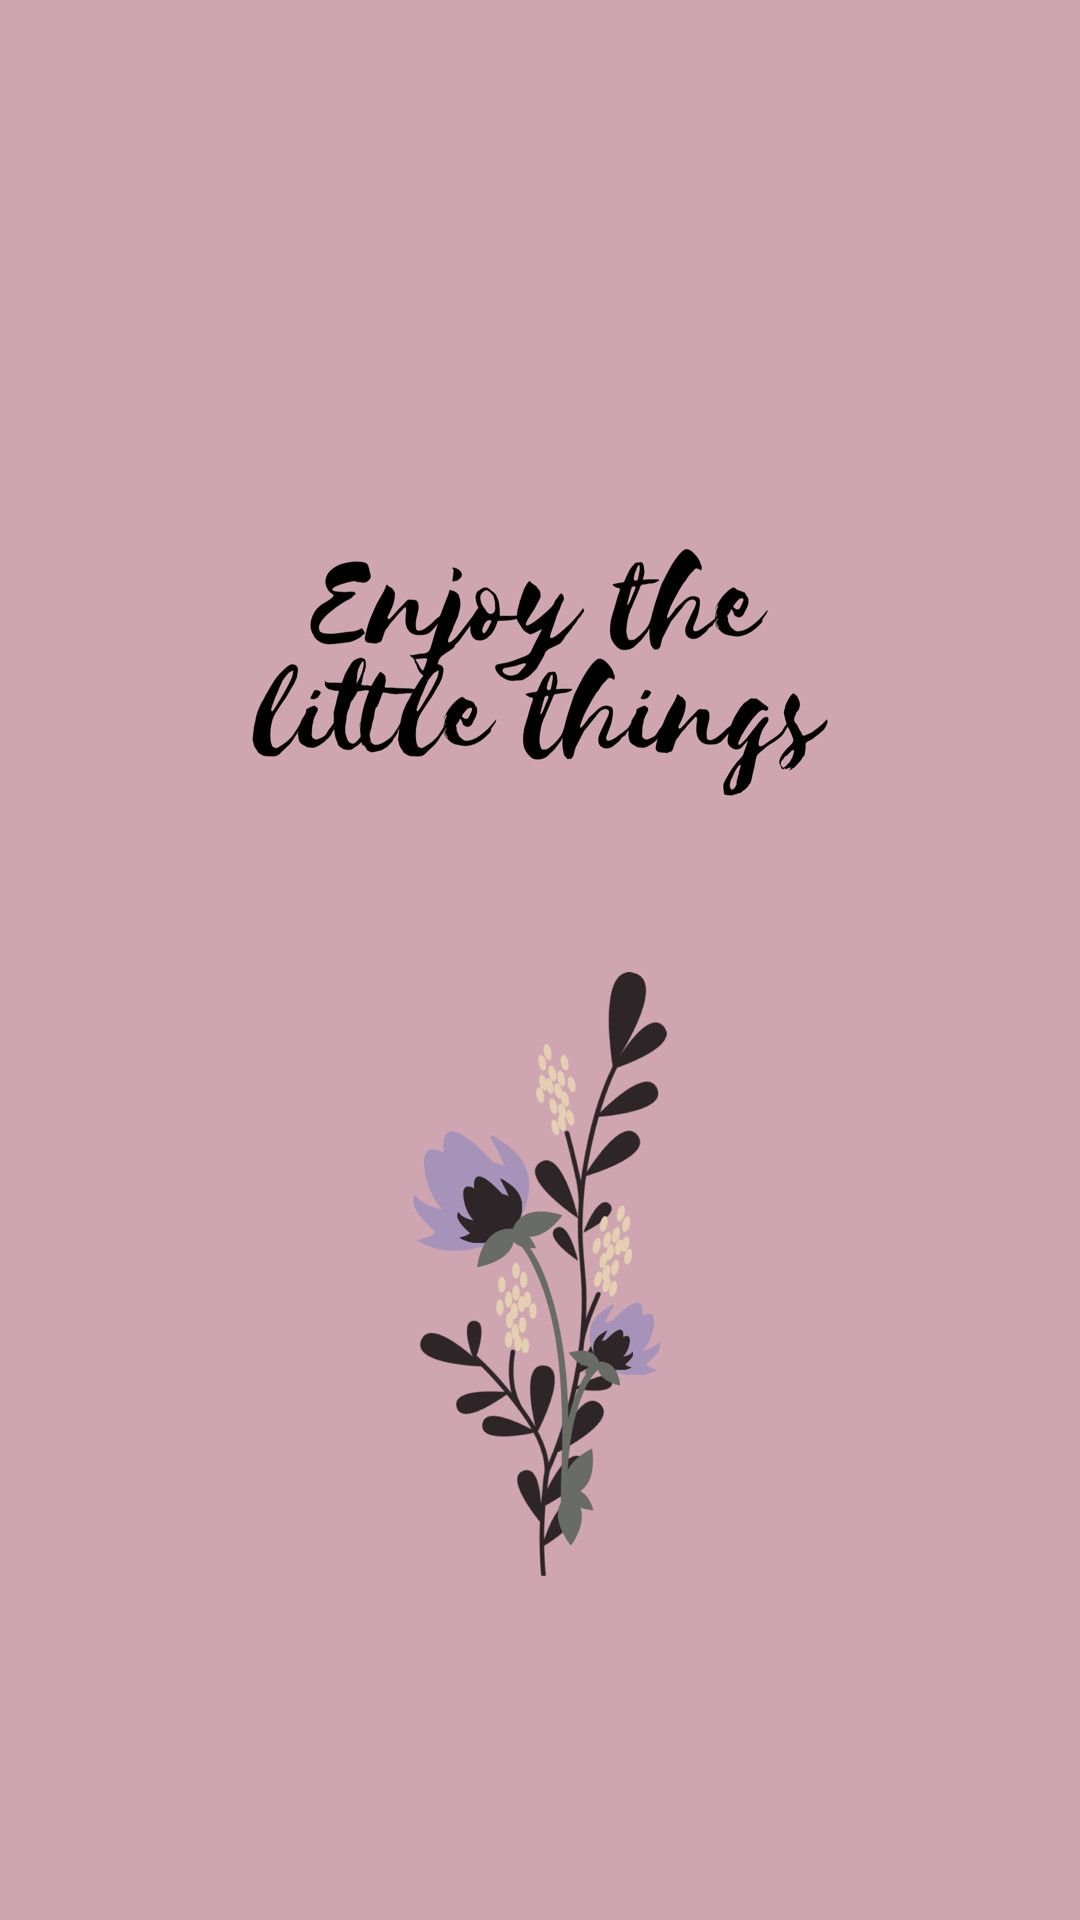 wallpapers with sayings for mobile